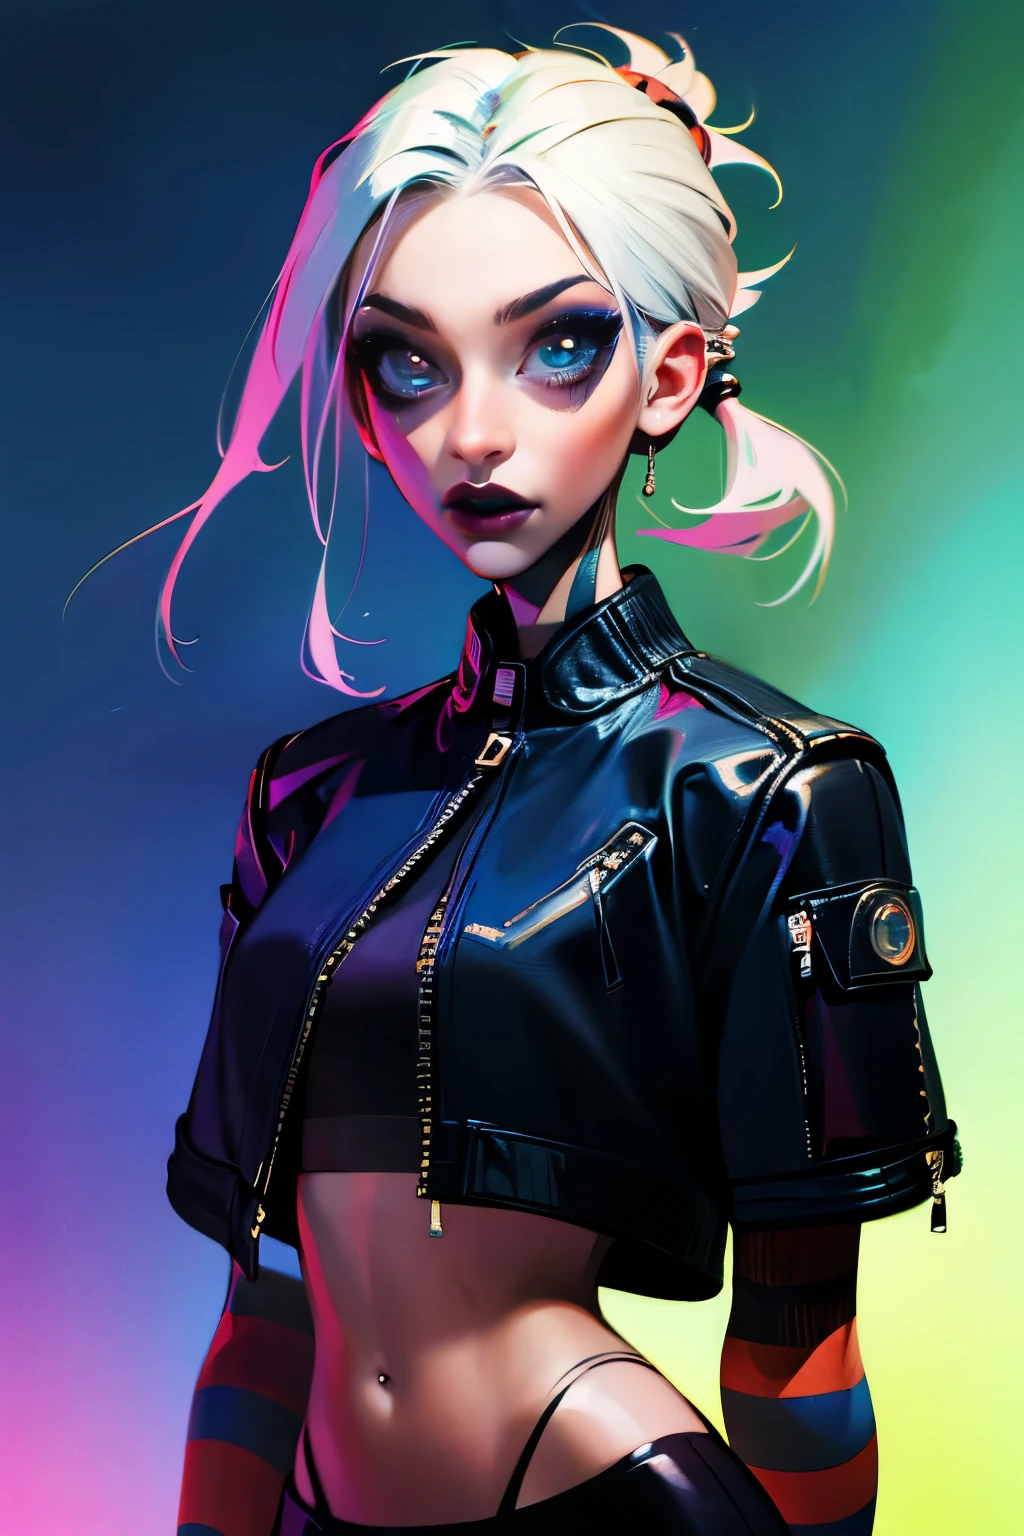 An ultra-realistic CG illustration of  katopunk as gothgirl waifu, perfect anime eyes, detailed eyes, solo, piercing gaze and bold makeup,  wearing a leather jacket with a crop top, and her hair is styled in a sleek updo.